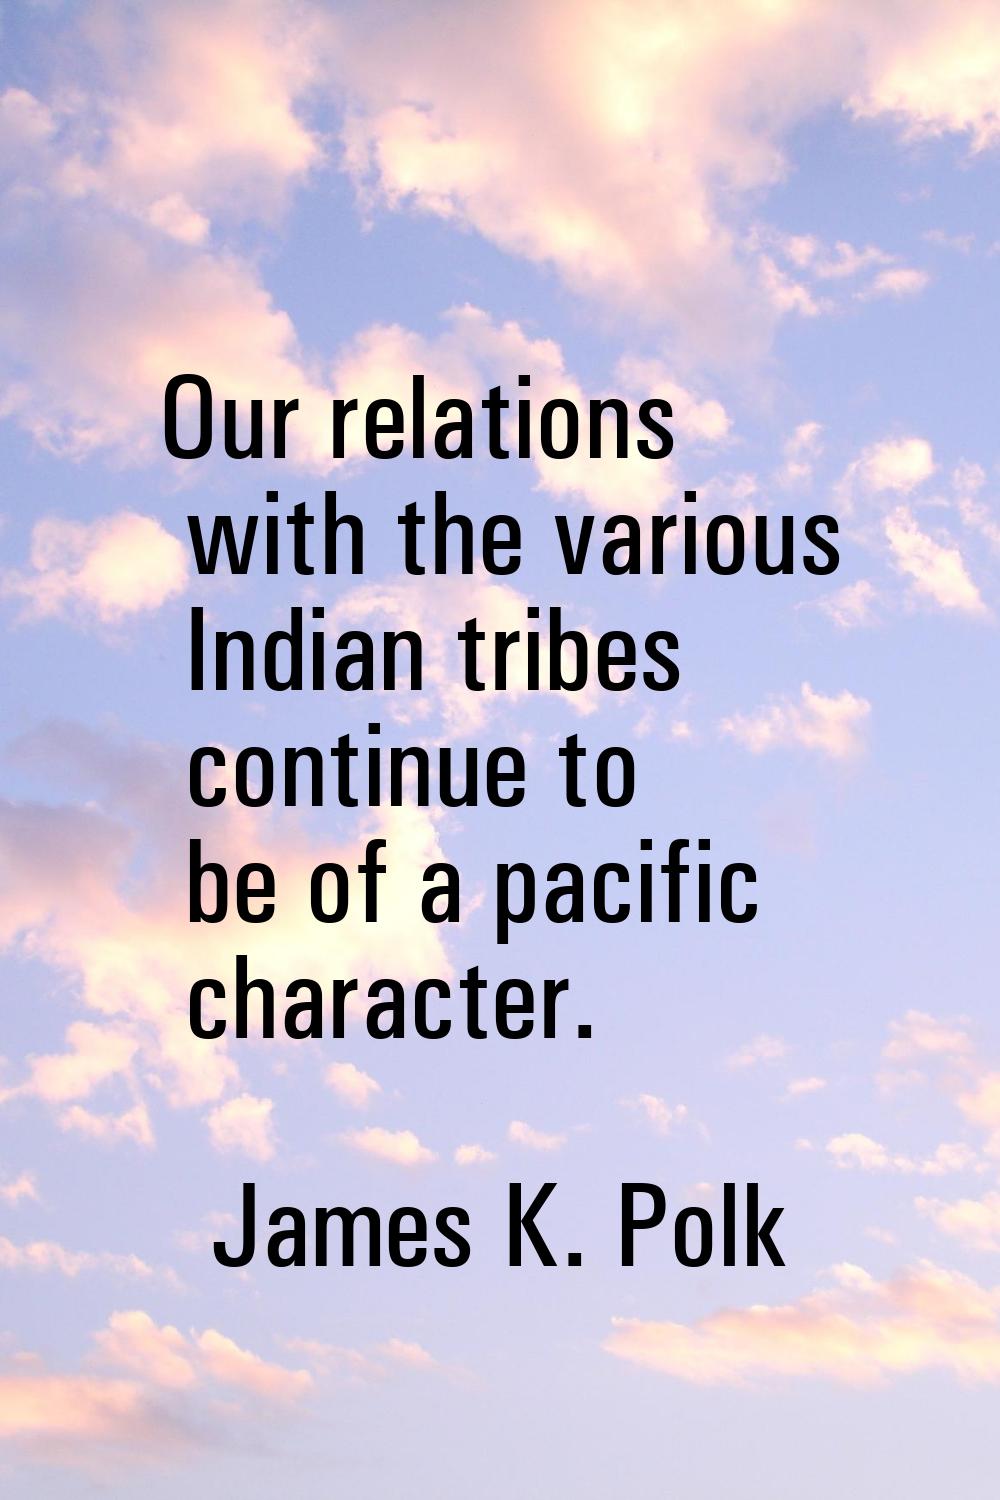 Our relations with the various Indian tribes continue to be of a pacific character.